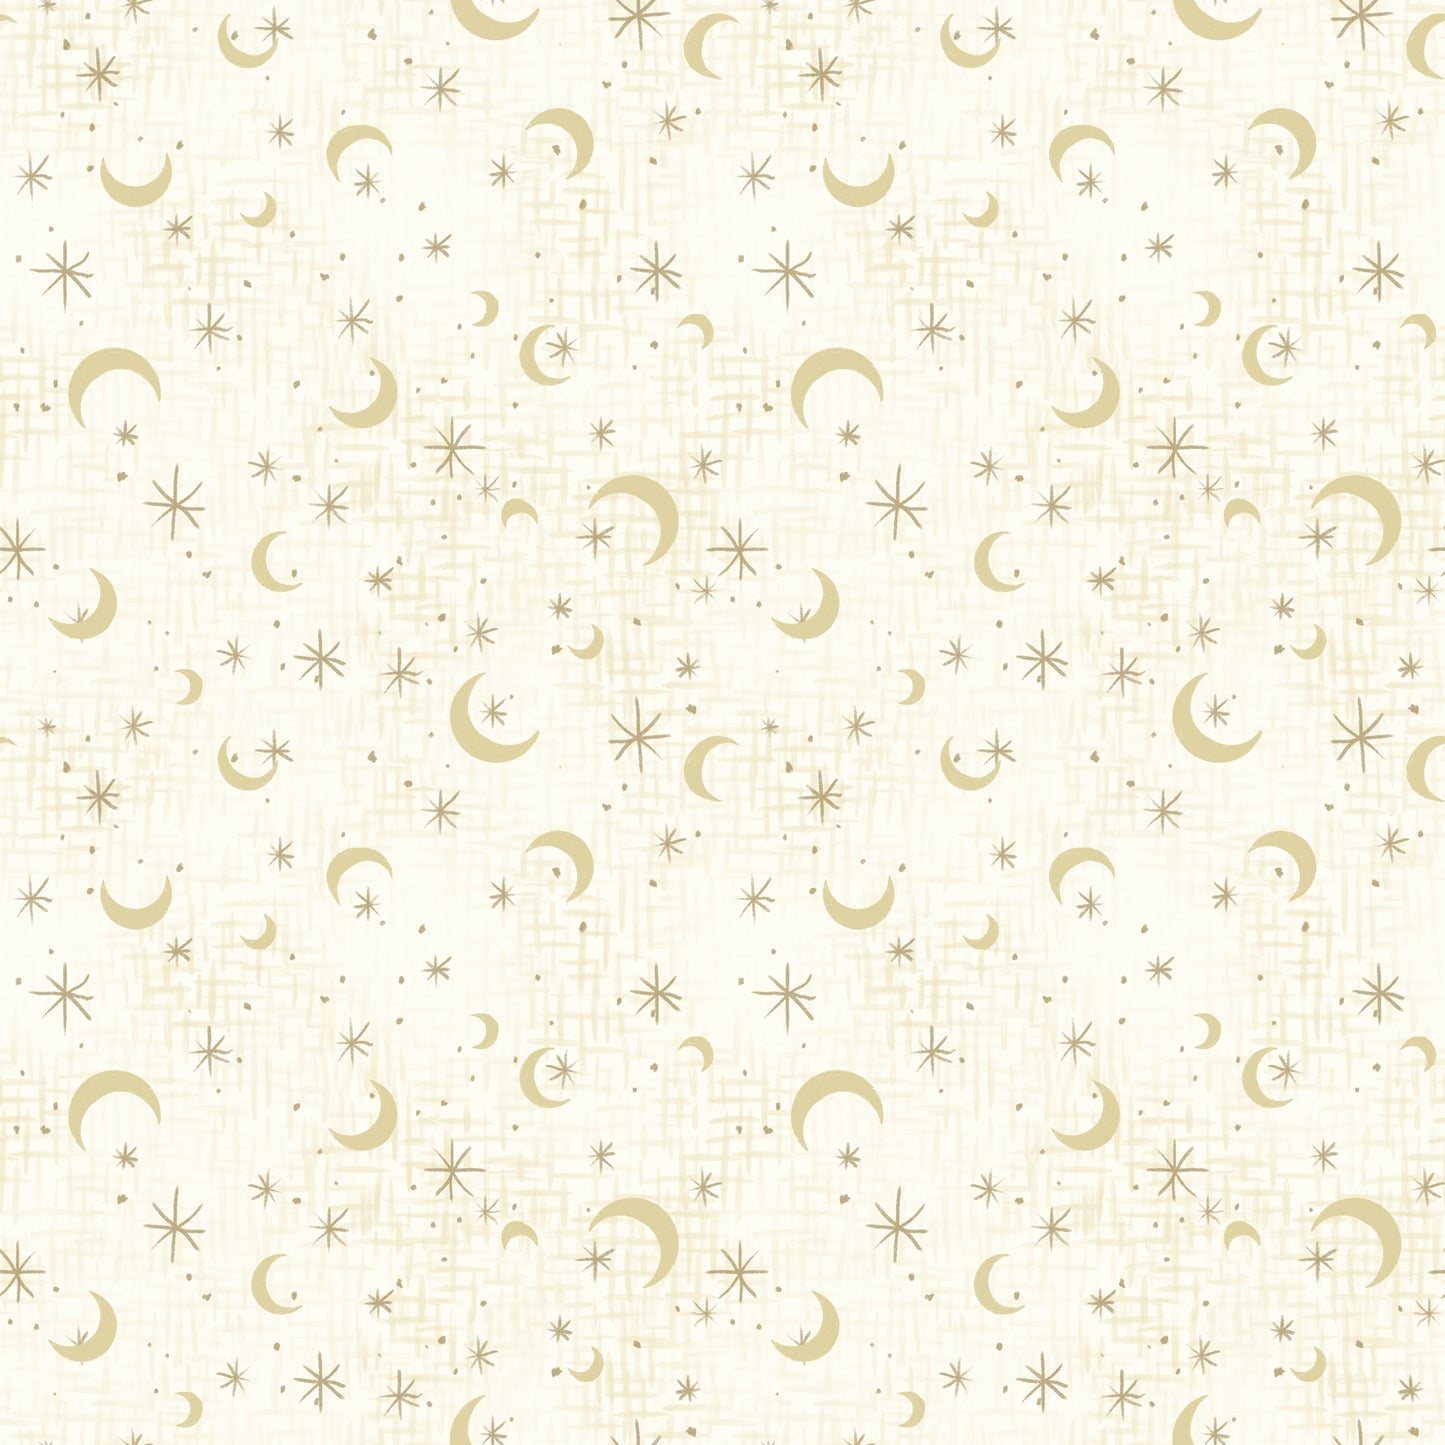 Midnight Rendezvous by Raquel Maciel Crescent Moons with Stars Ivory    2903-41 Cotton Woven Fabric